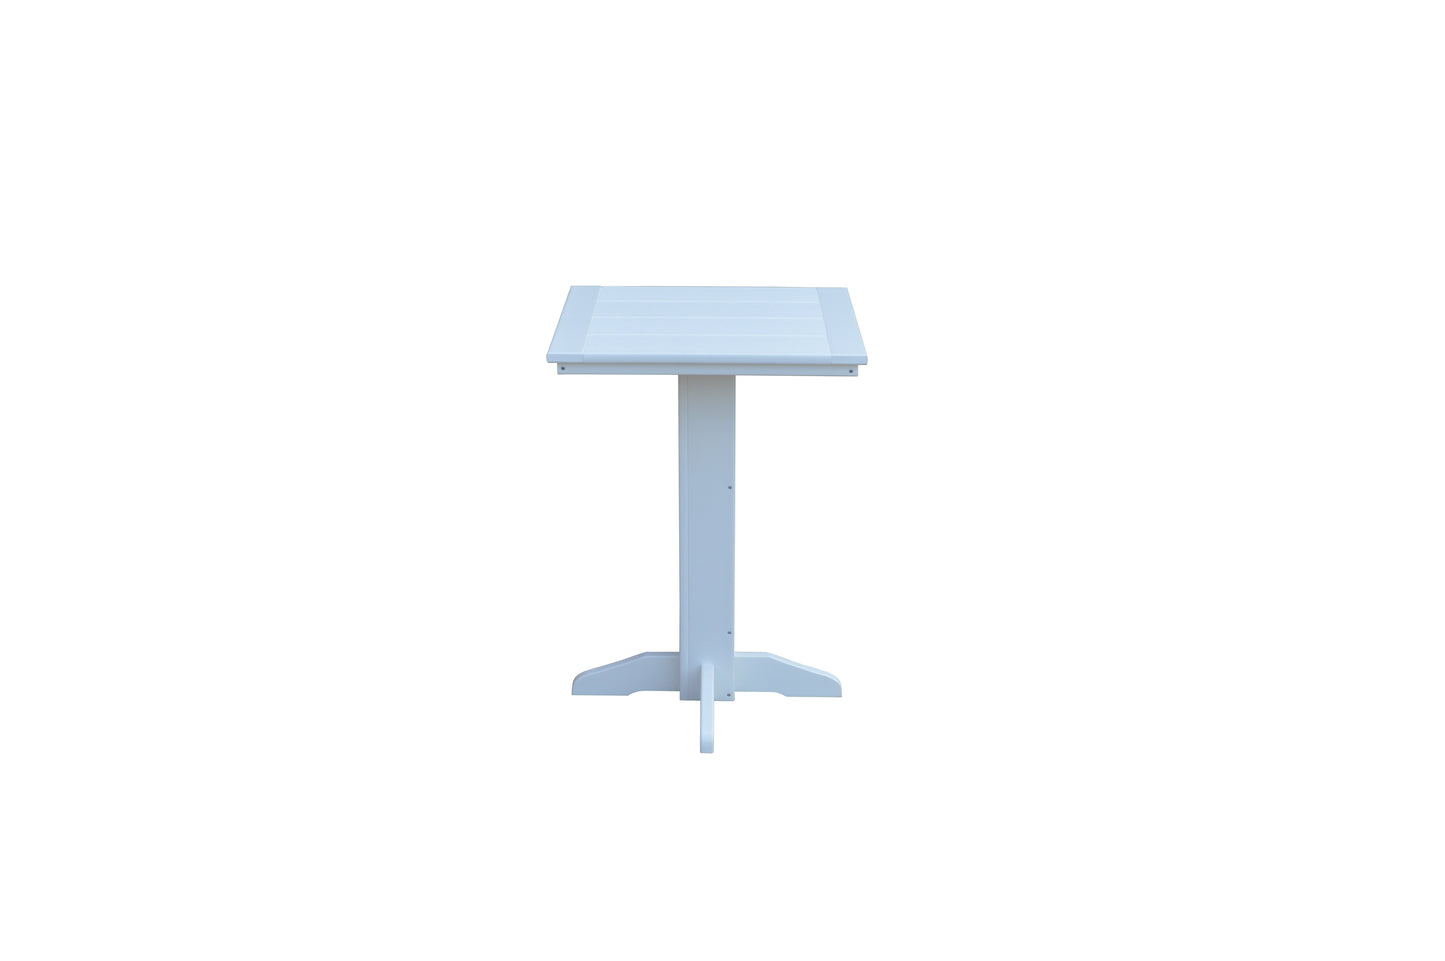 A&L Furniture Co. Recycled Plastic Square Bistro Table - LEAD TIME TO SHIP 10 BUSINESS DAYS